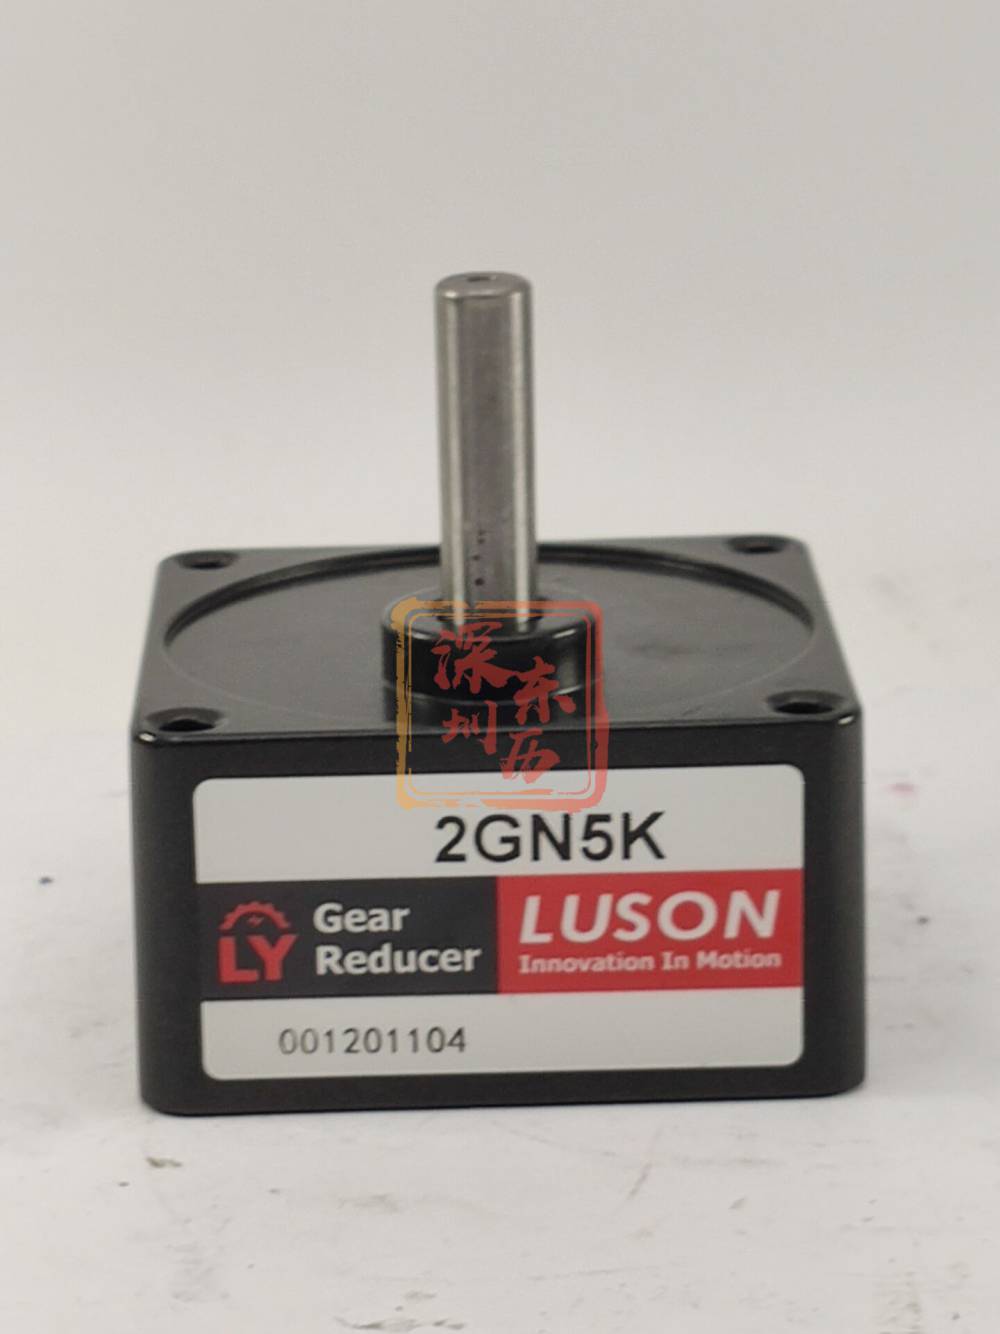 2GN5K GEAR REDUCER LY LUSON INDUCTION MOTOR如展齿轮减速机